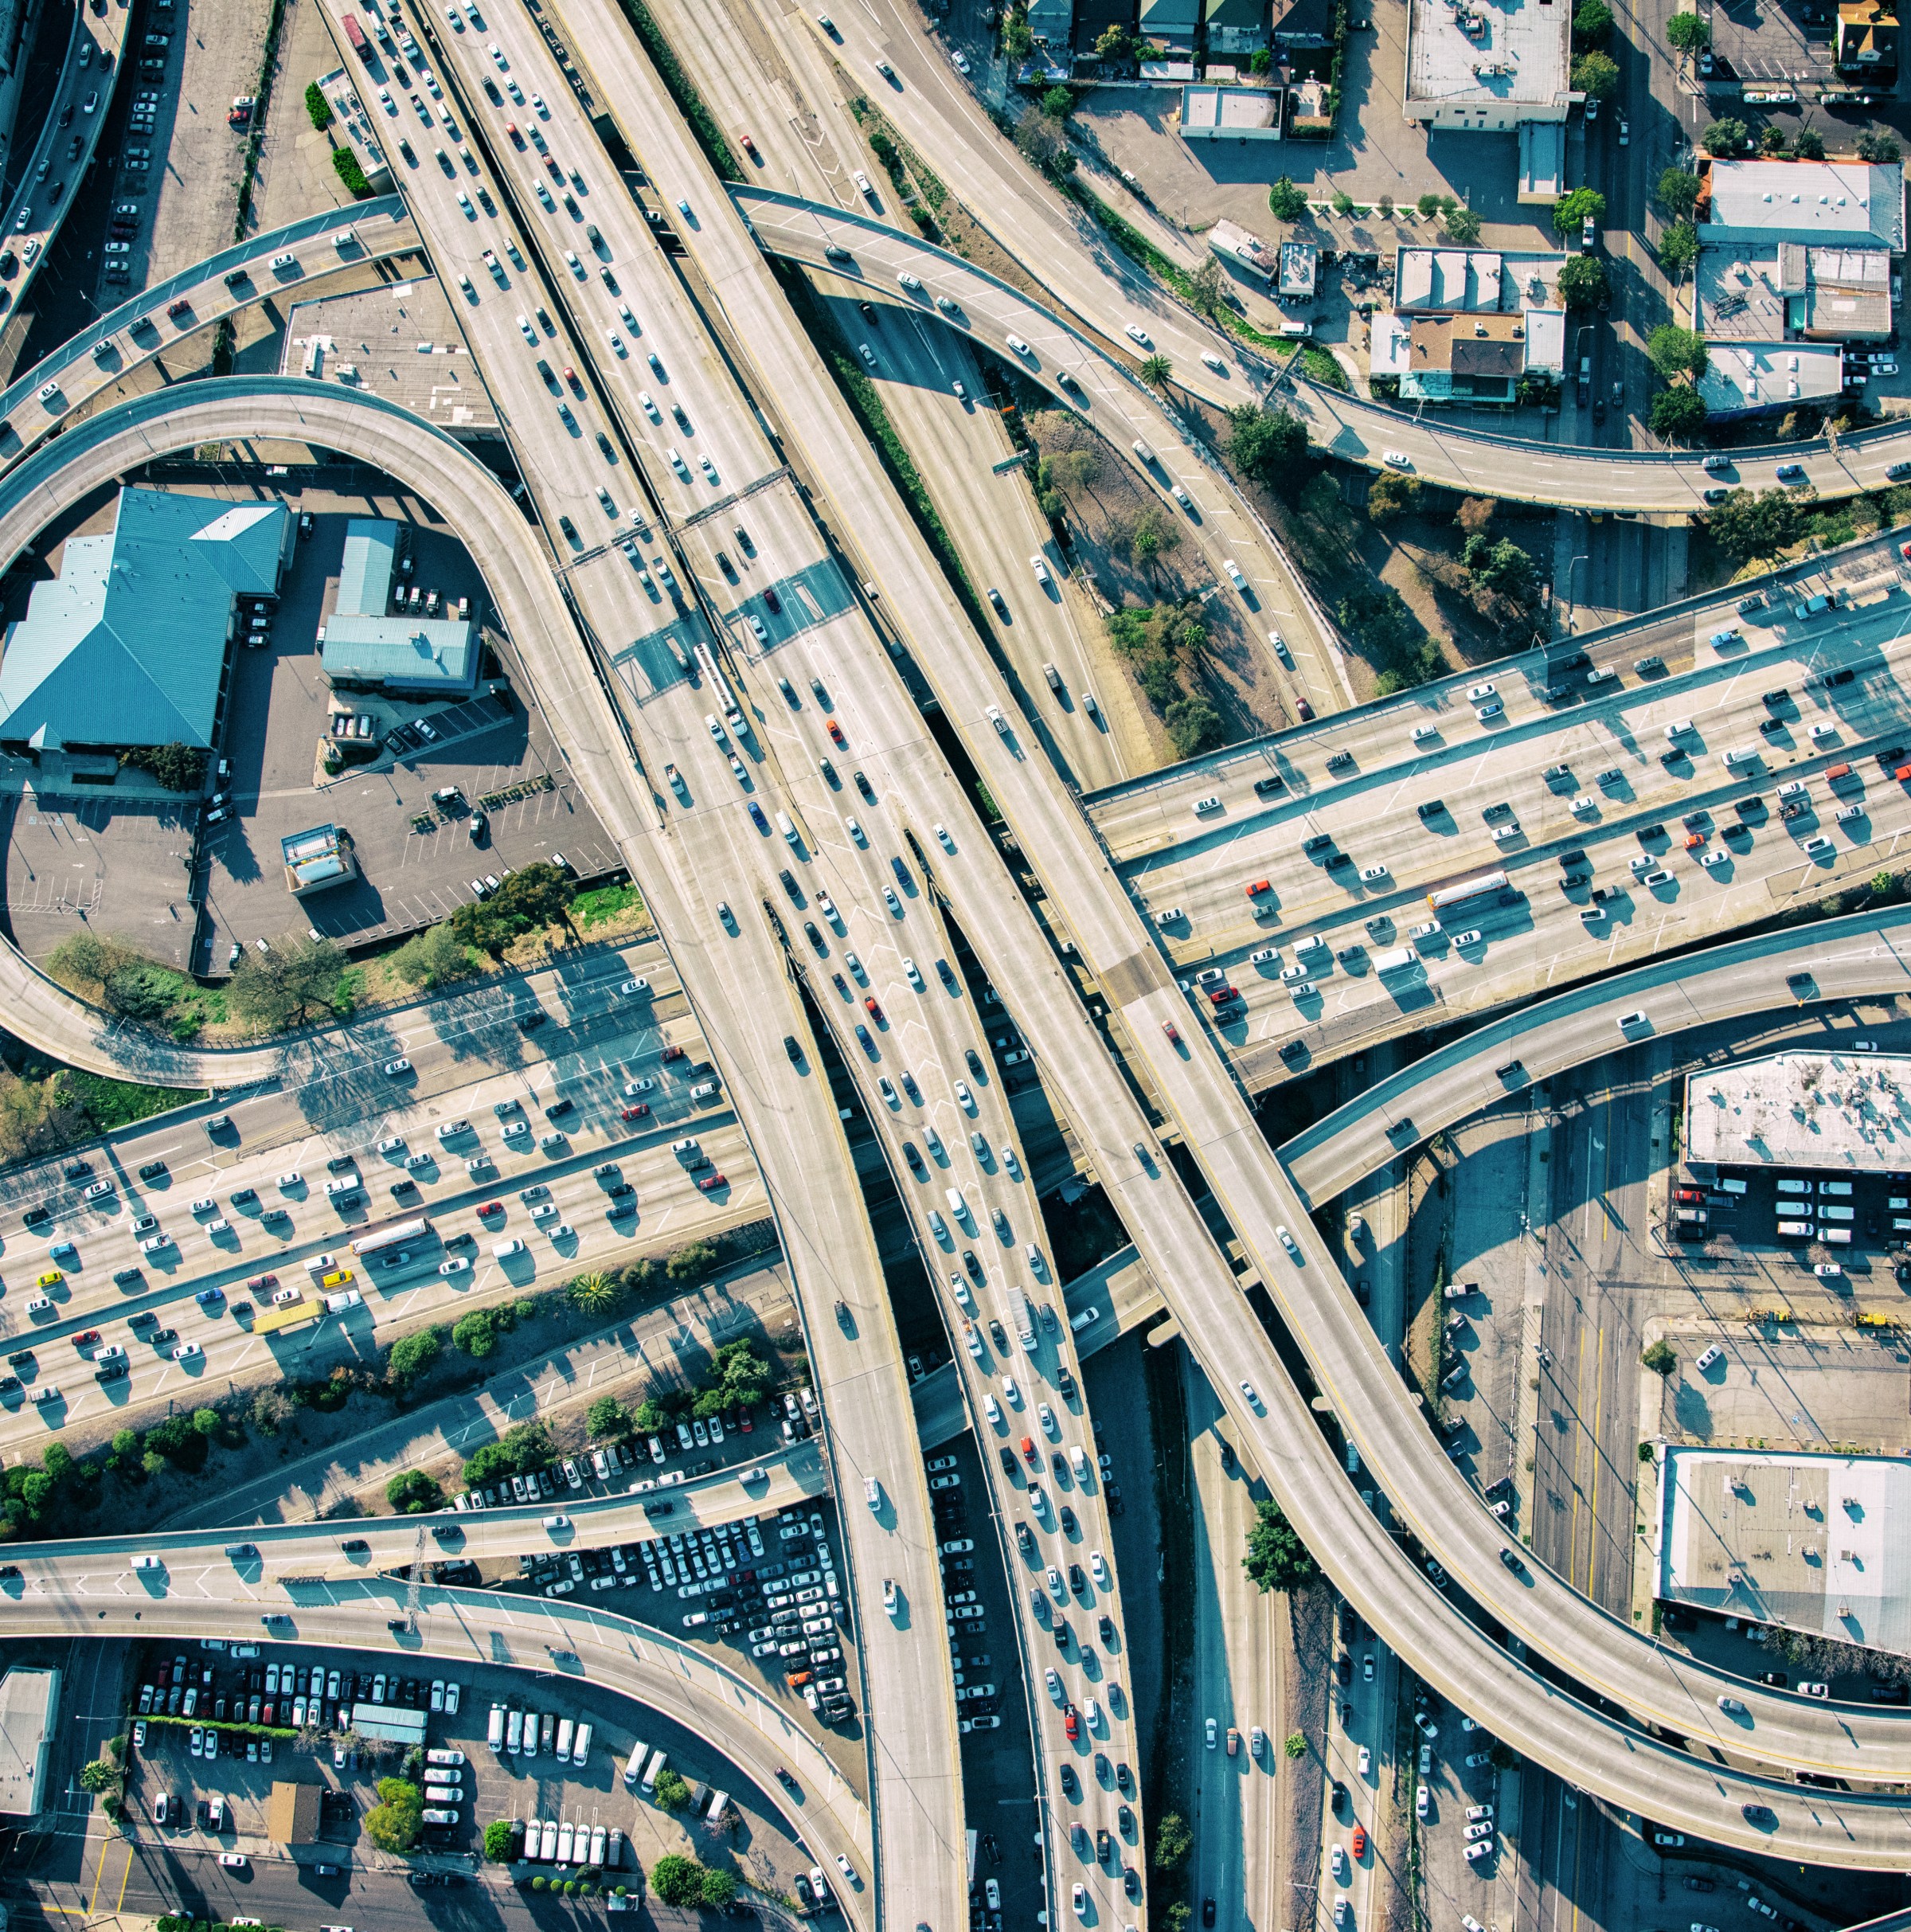 Do bigger highways actually help reduce traffic?